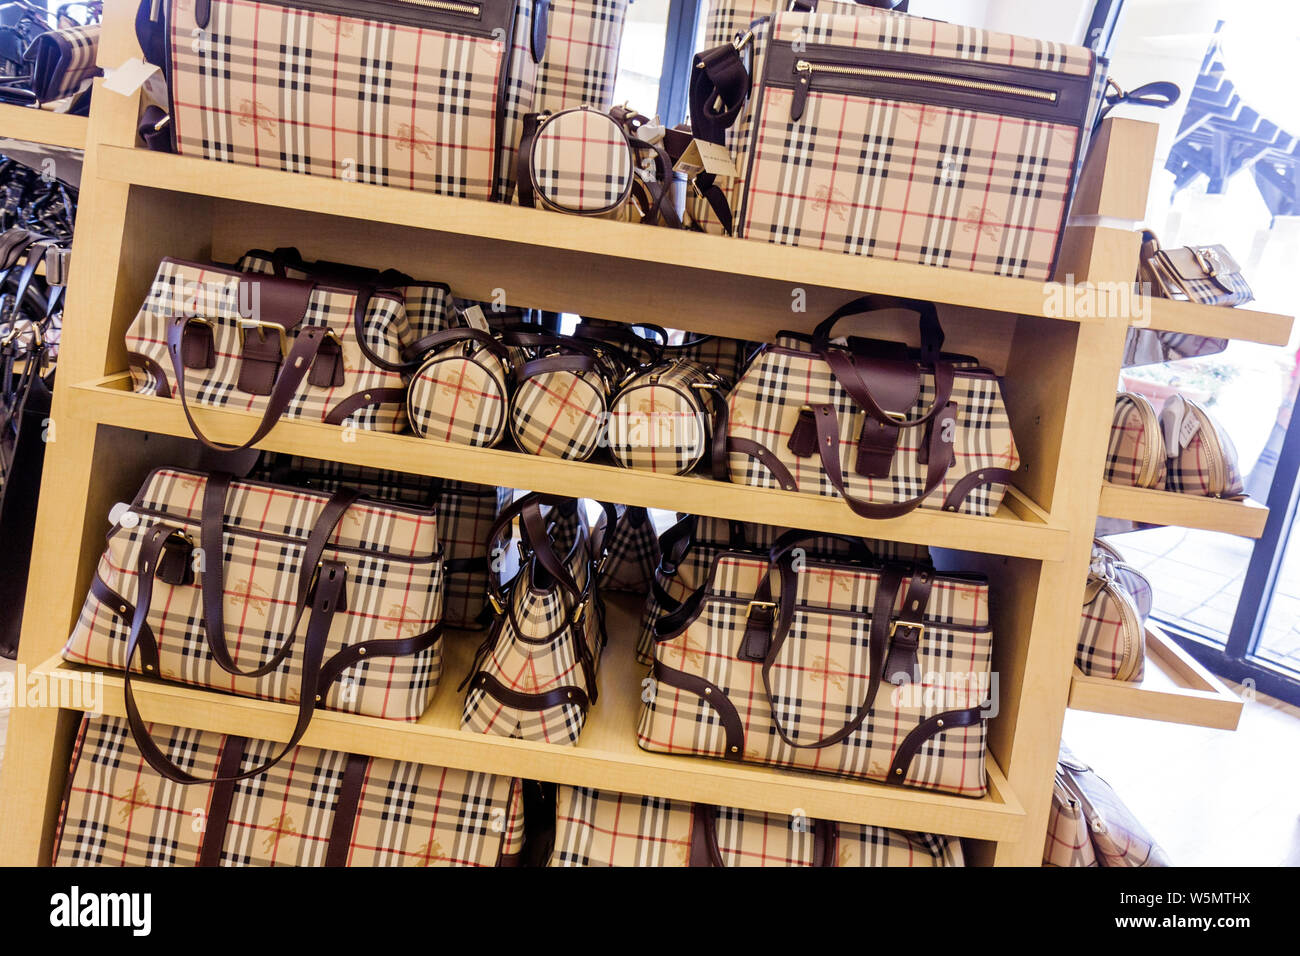 Burberry Store Shopping High Resolution 